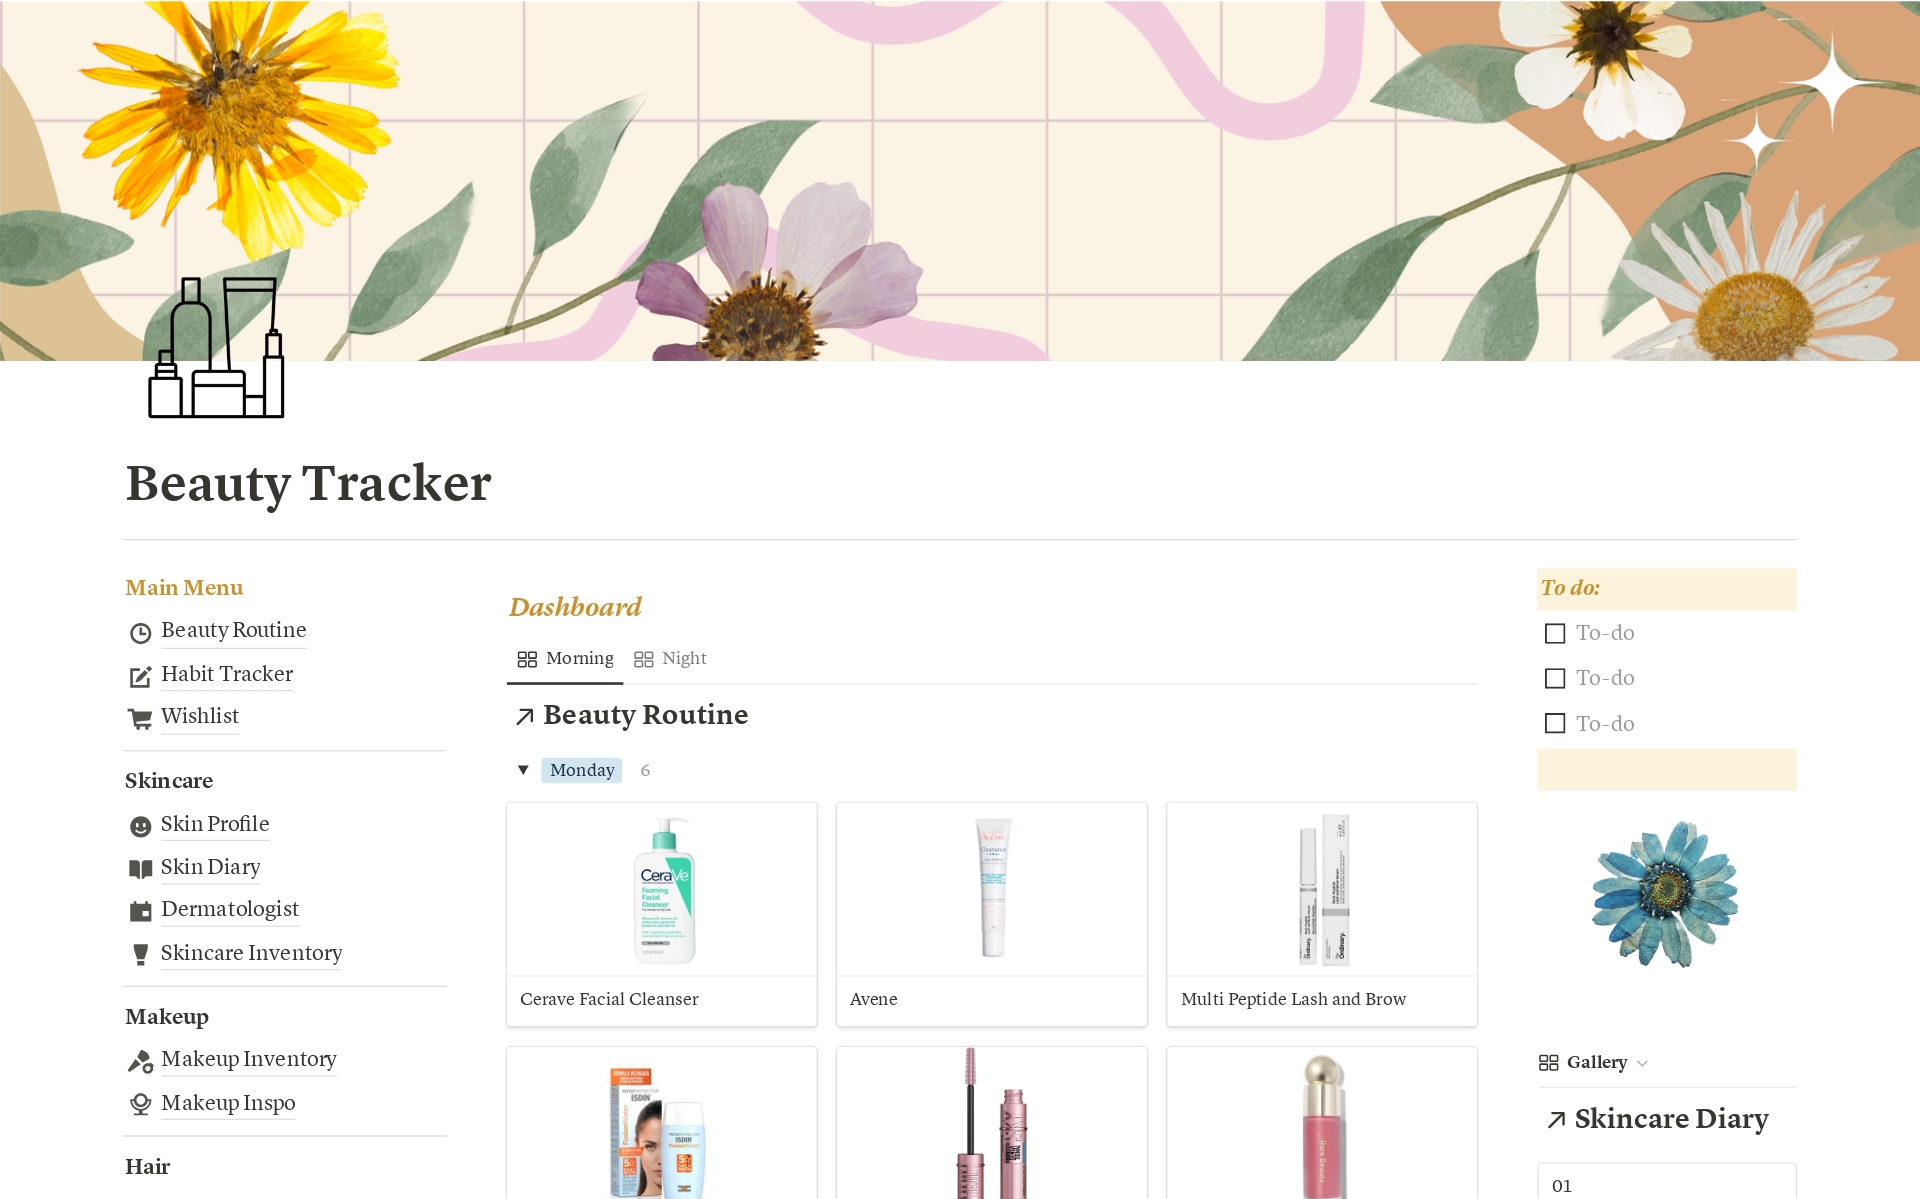 Are you passionate about skincare, makeup, and personal grooming? Our Beauty Tracker Notion Template is the ultimate tool to elevate your beauty routine and help you achieve your beauty goals.